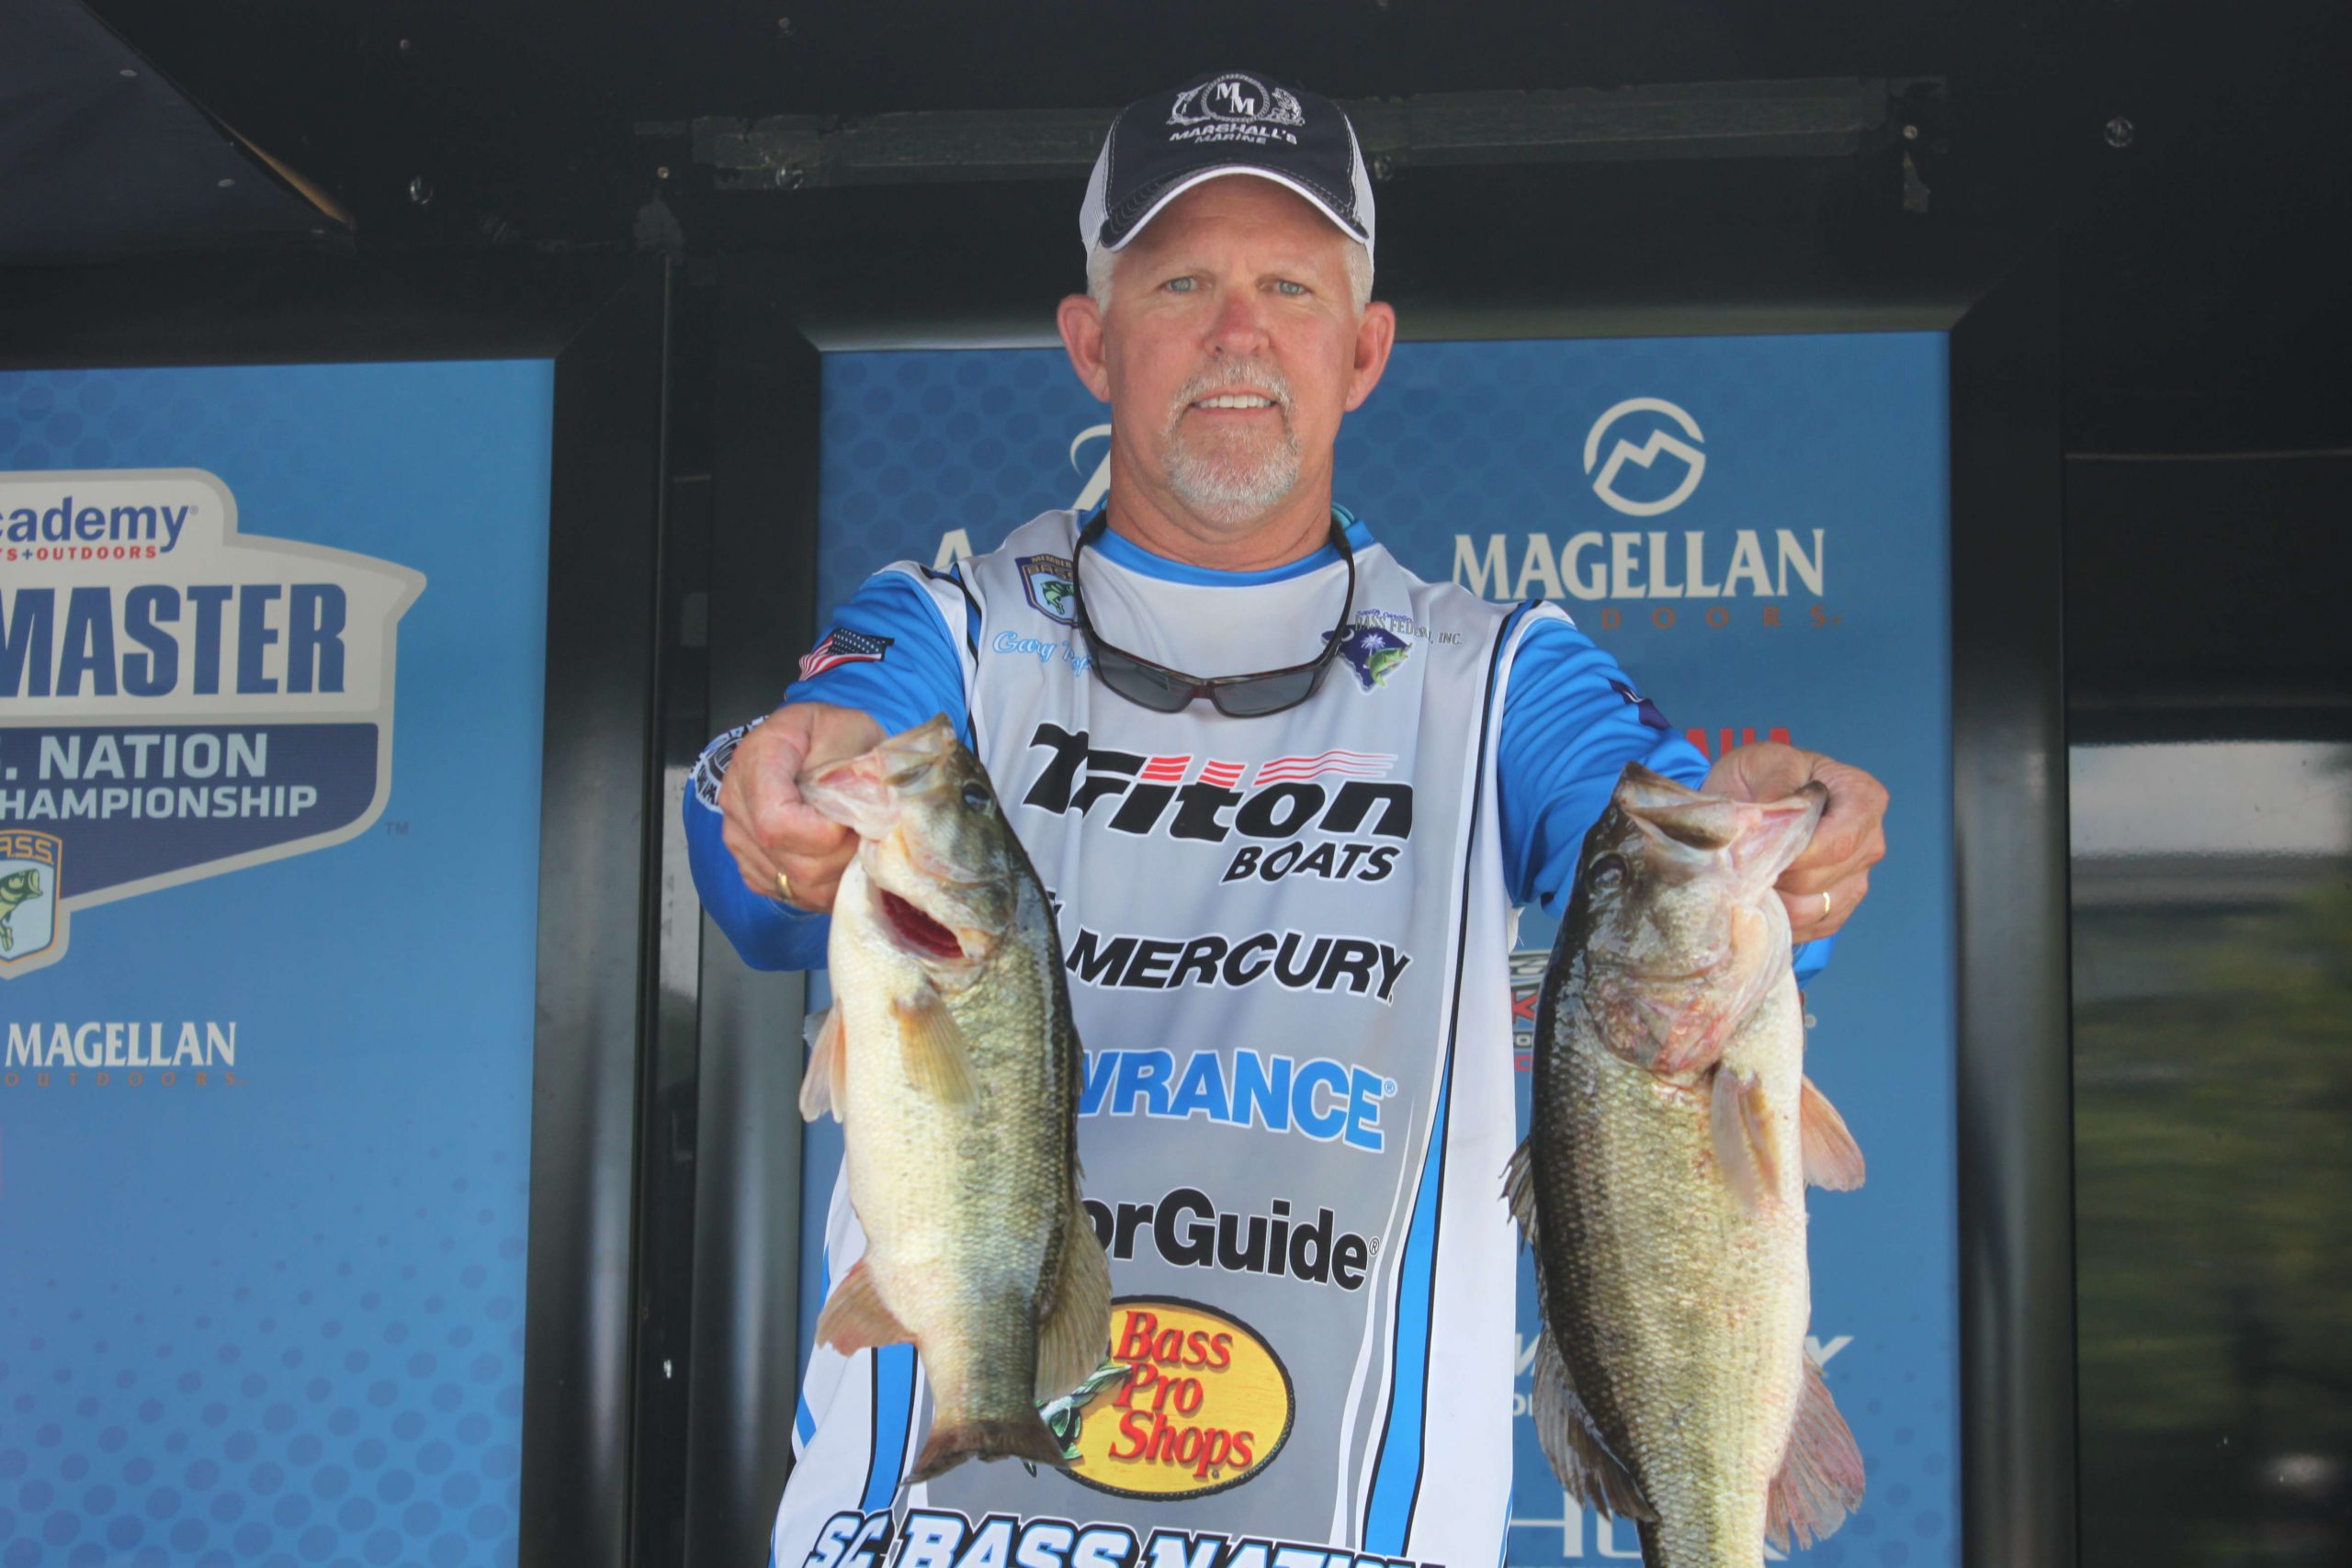 Gary Pope seized the Day 1 non-boater lead early in the weigh-in with a three-bass limit that totaled 10-4. Pope lives in Georgetown, and said he may be the only angler in the field with a true home-water advantage.